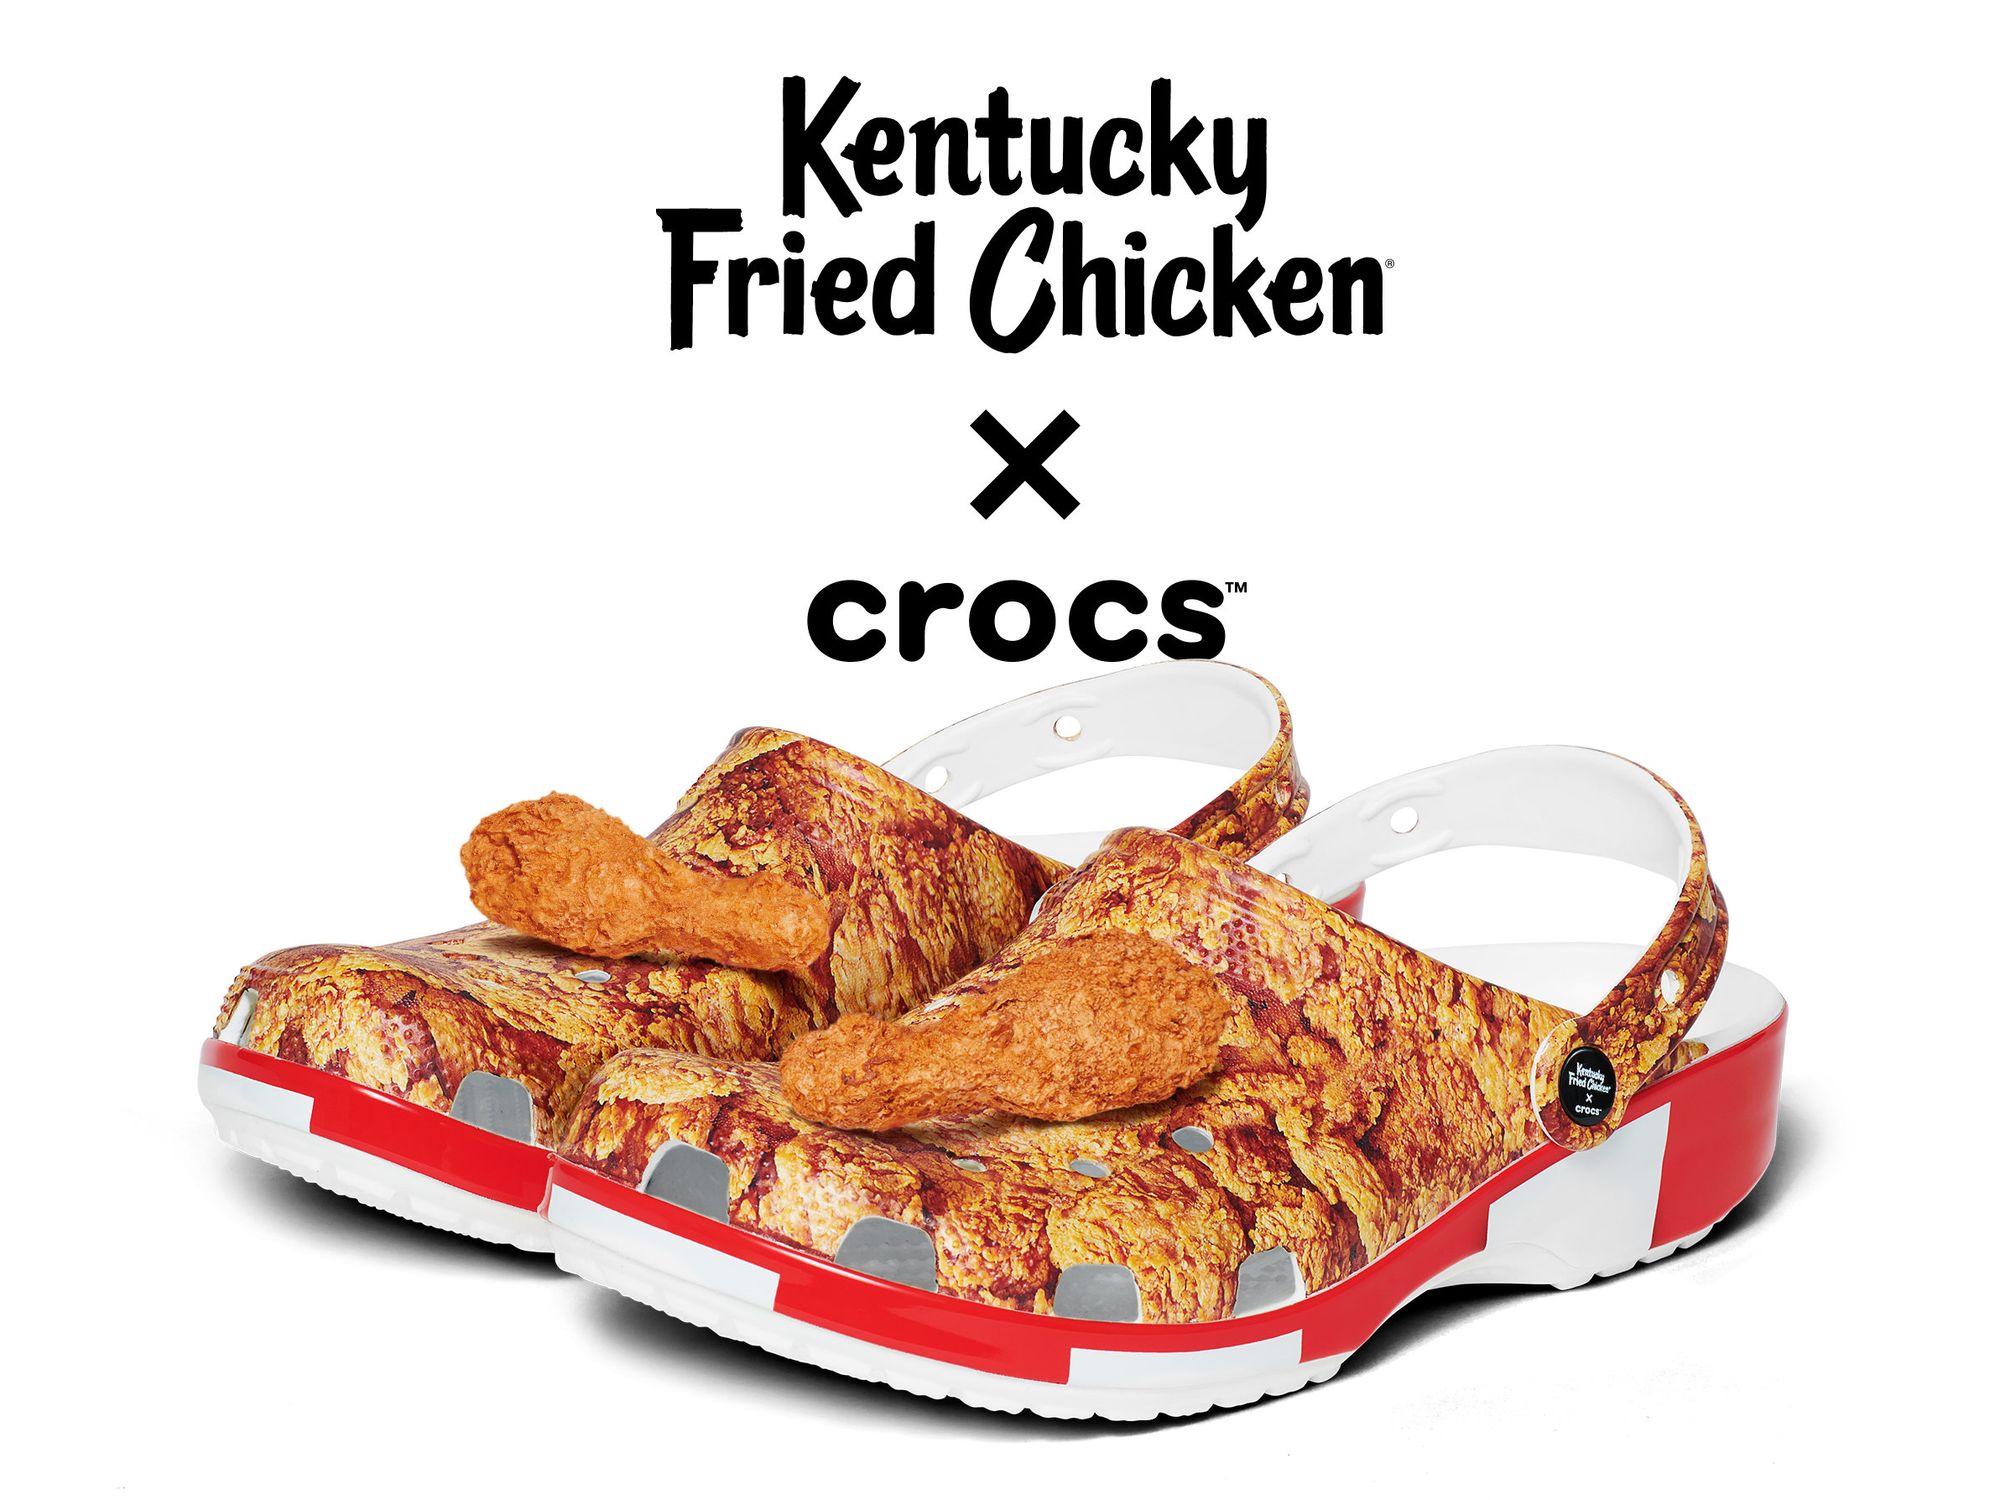 There are now KFC Crocs complete with fried chicken shoe charms